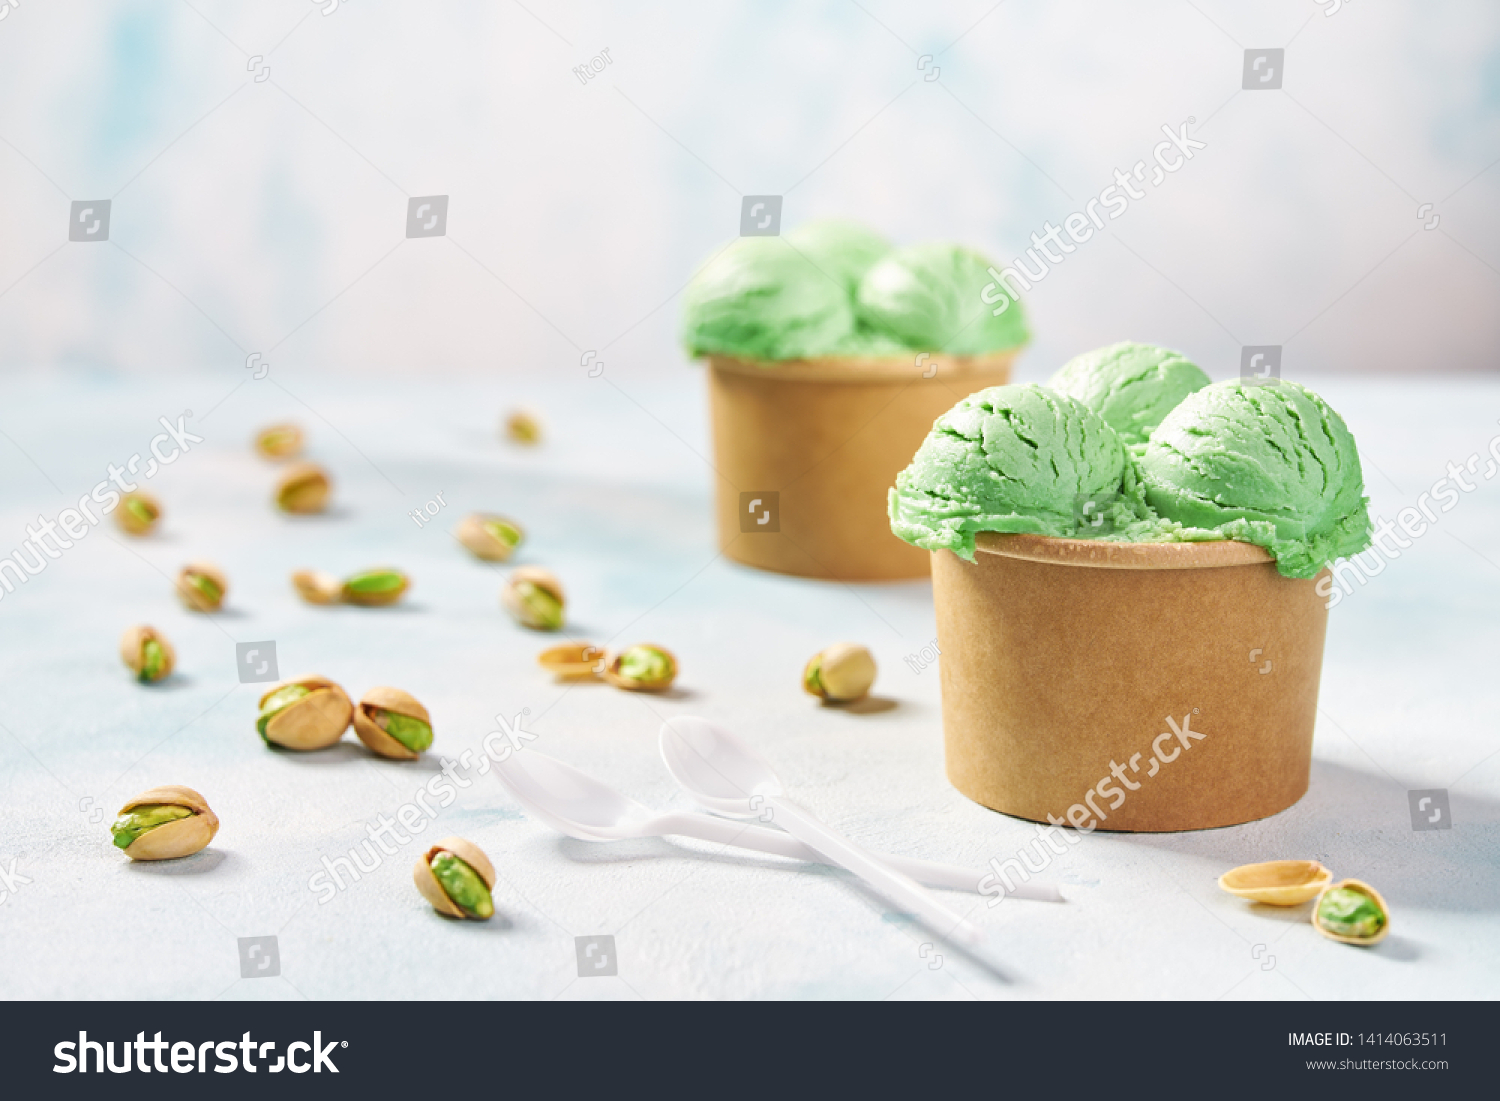 Download Pistachio Ice Cream Paper Cup On Stock Photo Edit Now 1414063511 Yellowimages Mockups